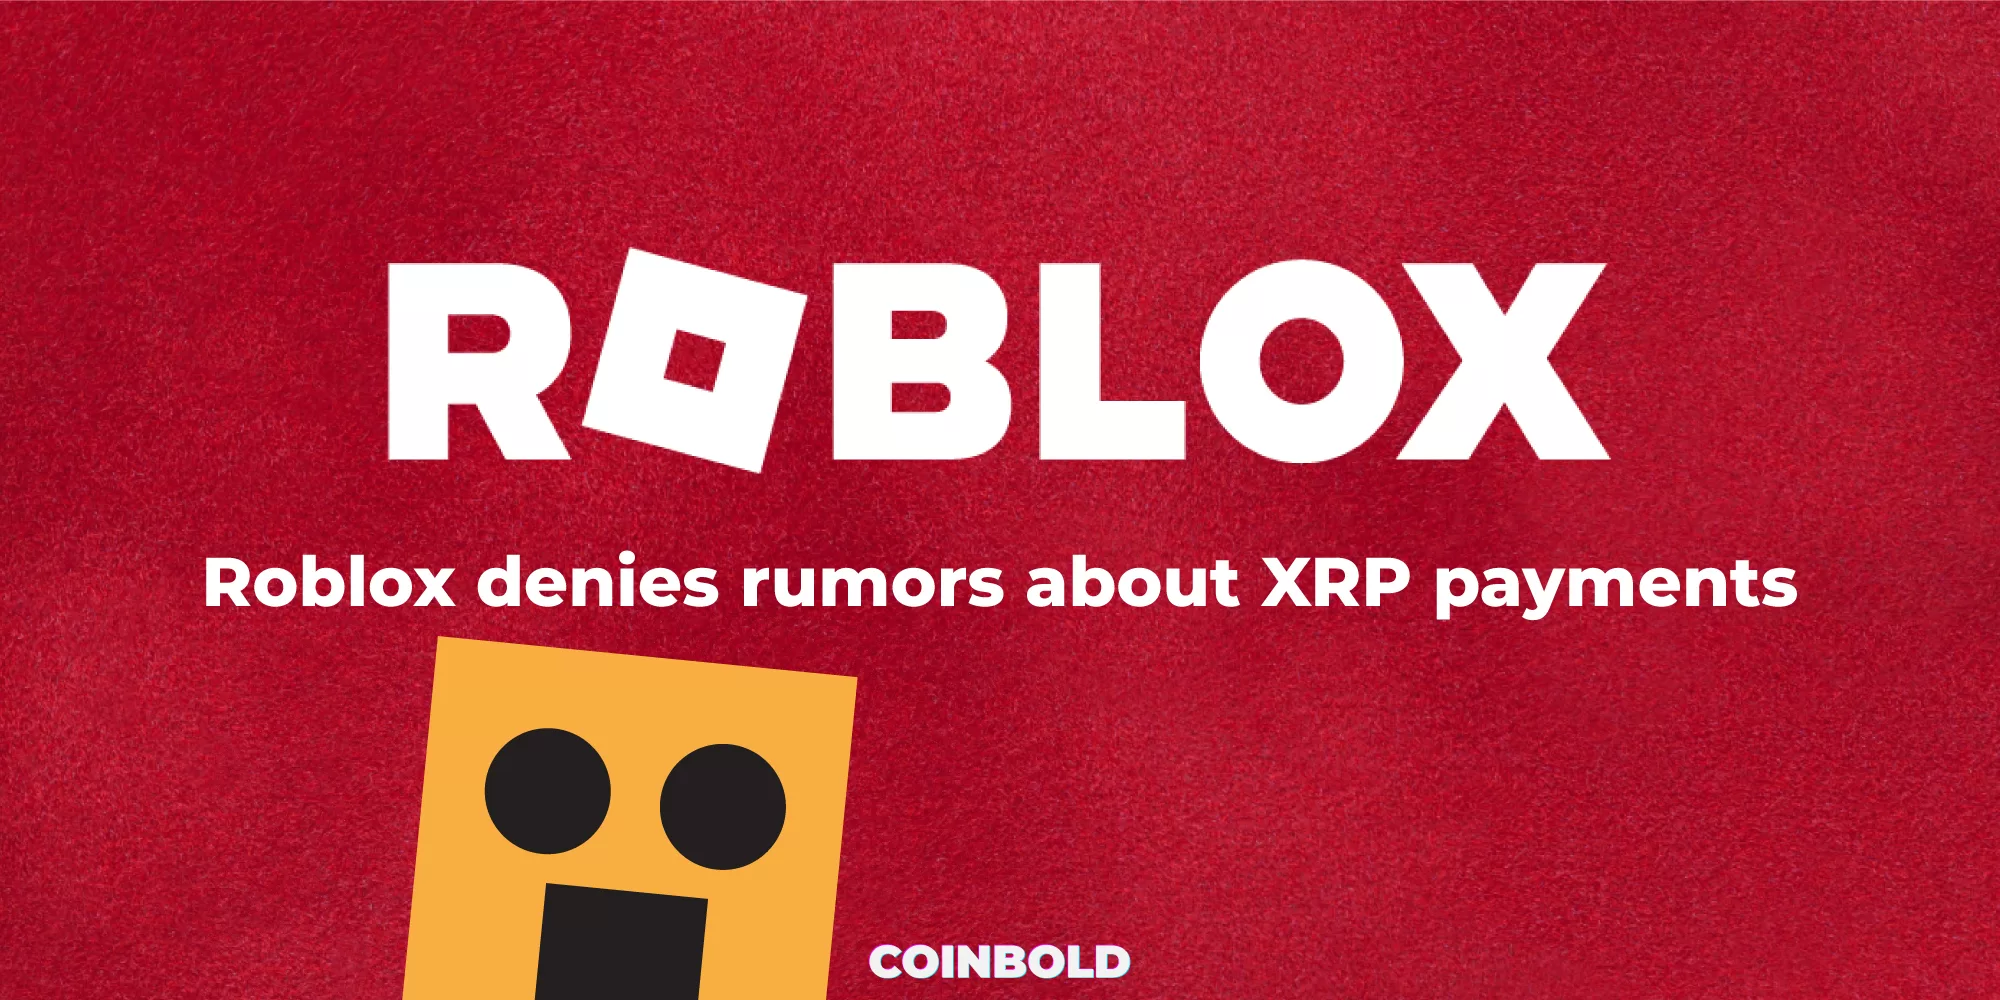 Roblox denies rumors about XRP payments